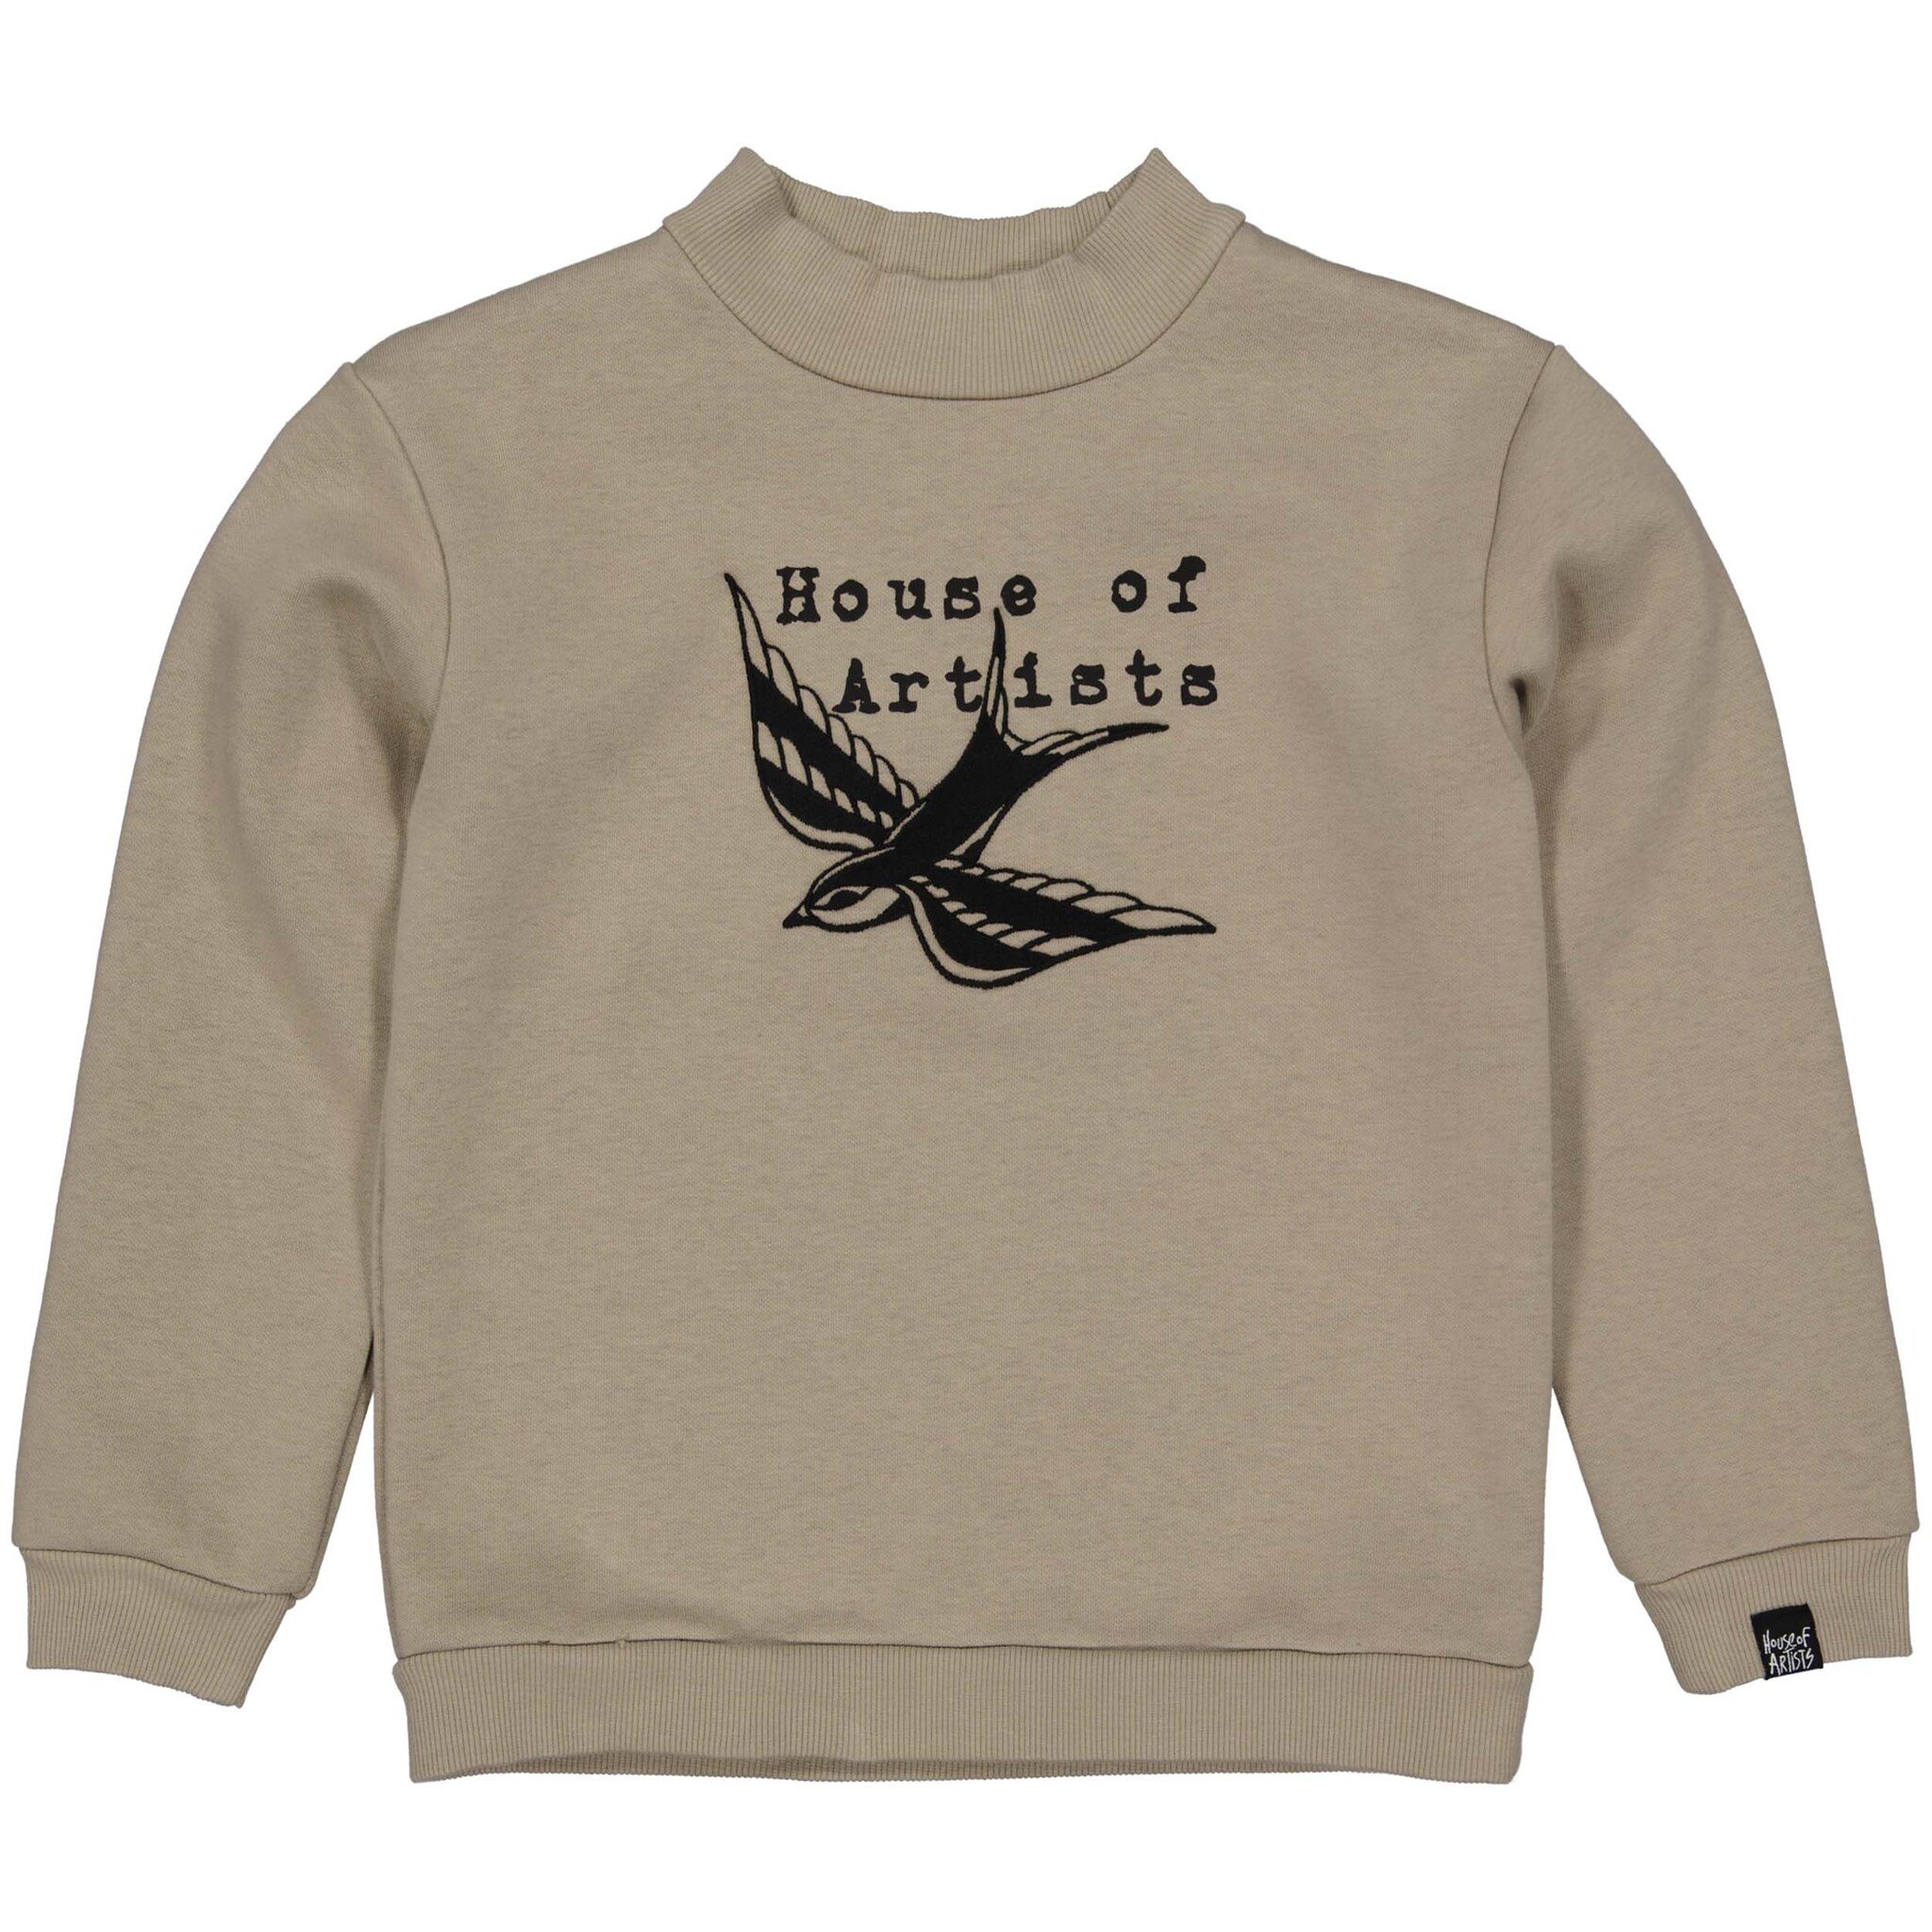 House of artists Sweater - Taupe